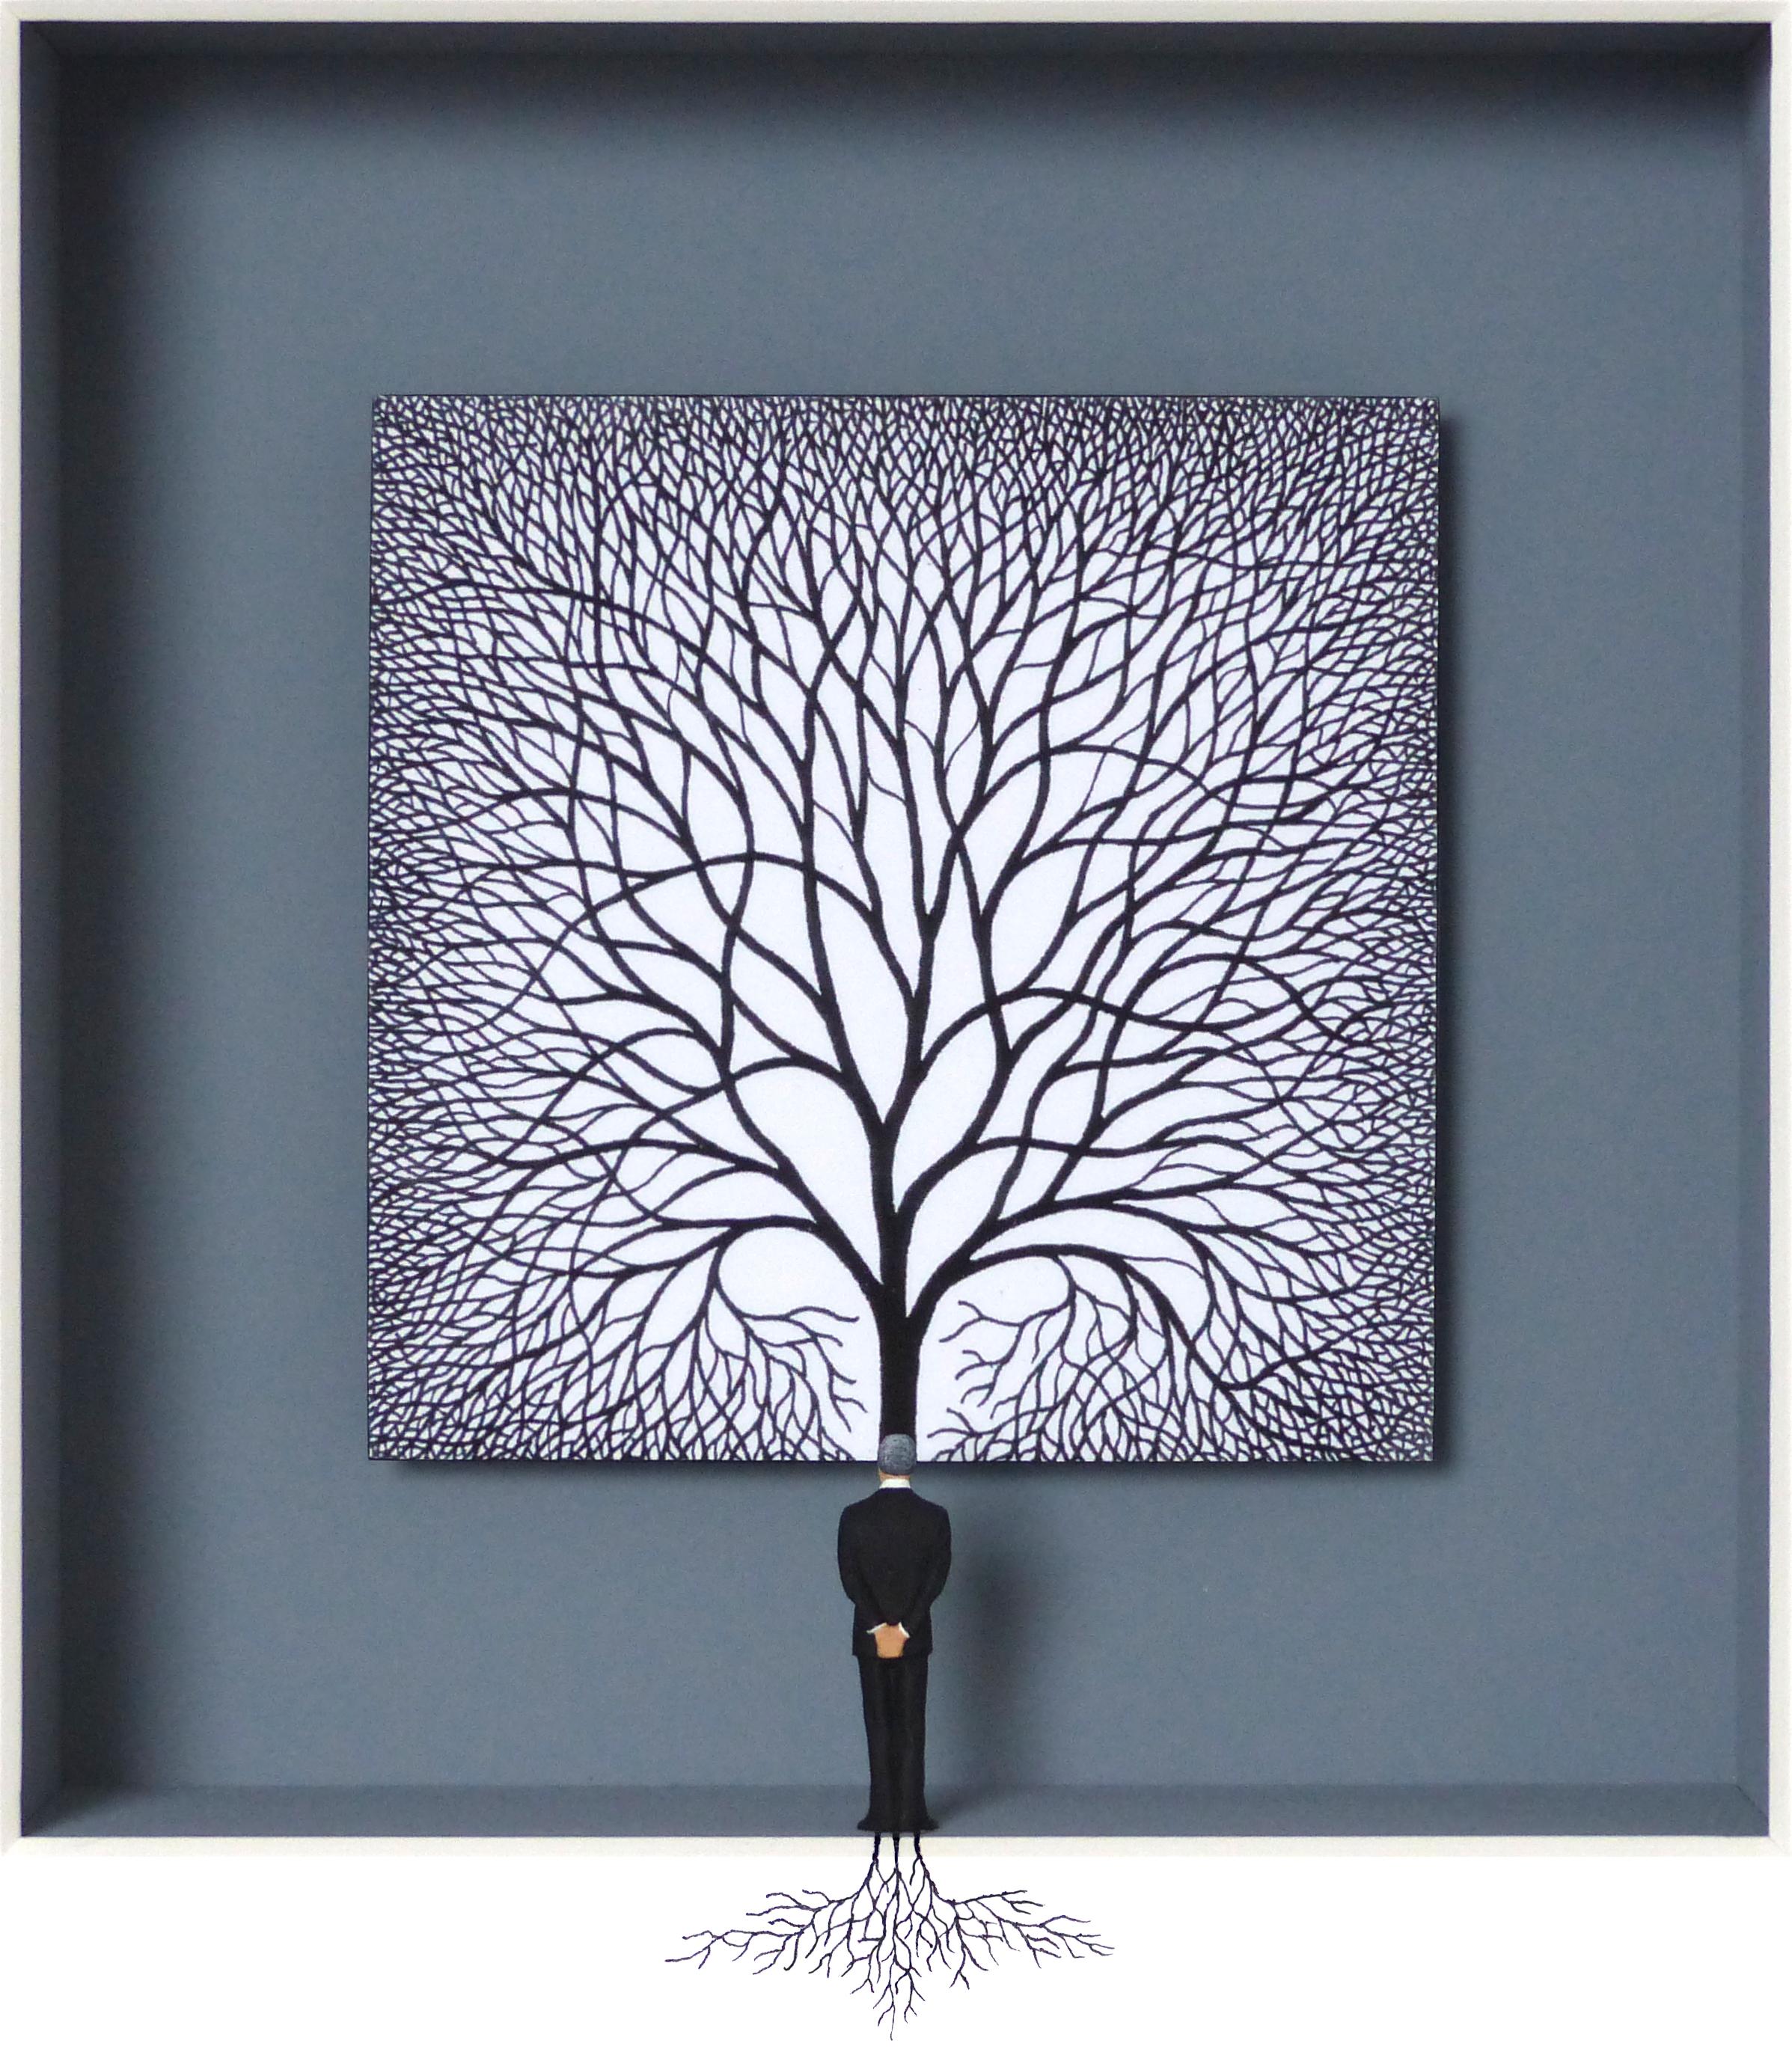 Branches & Roots- contemporary philosophical art in boxes artwork by Volker Kuhn